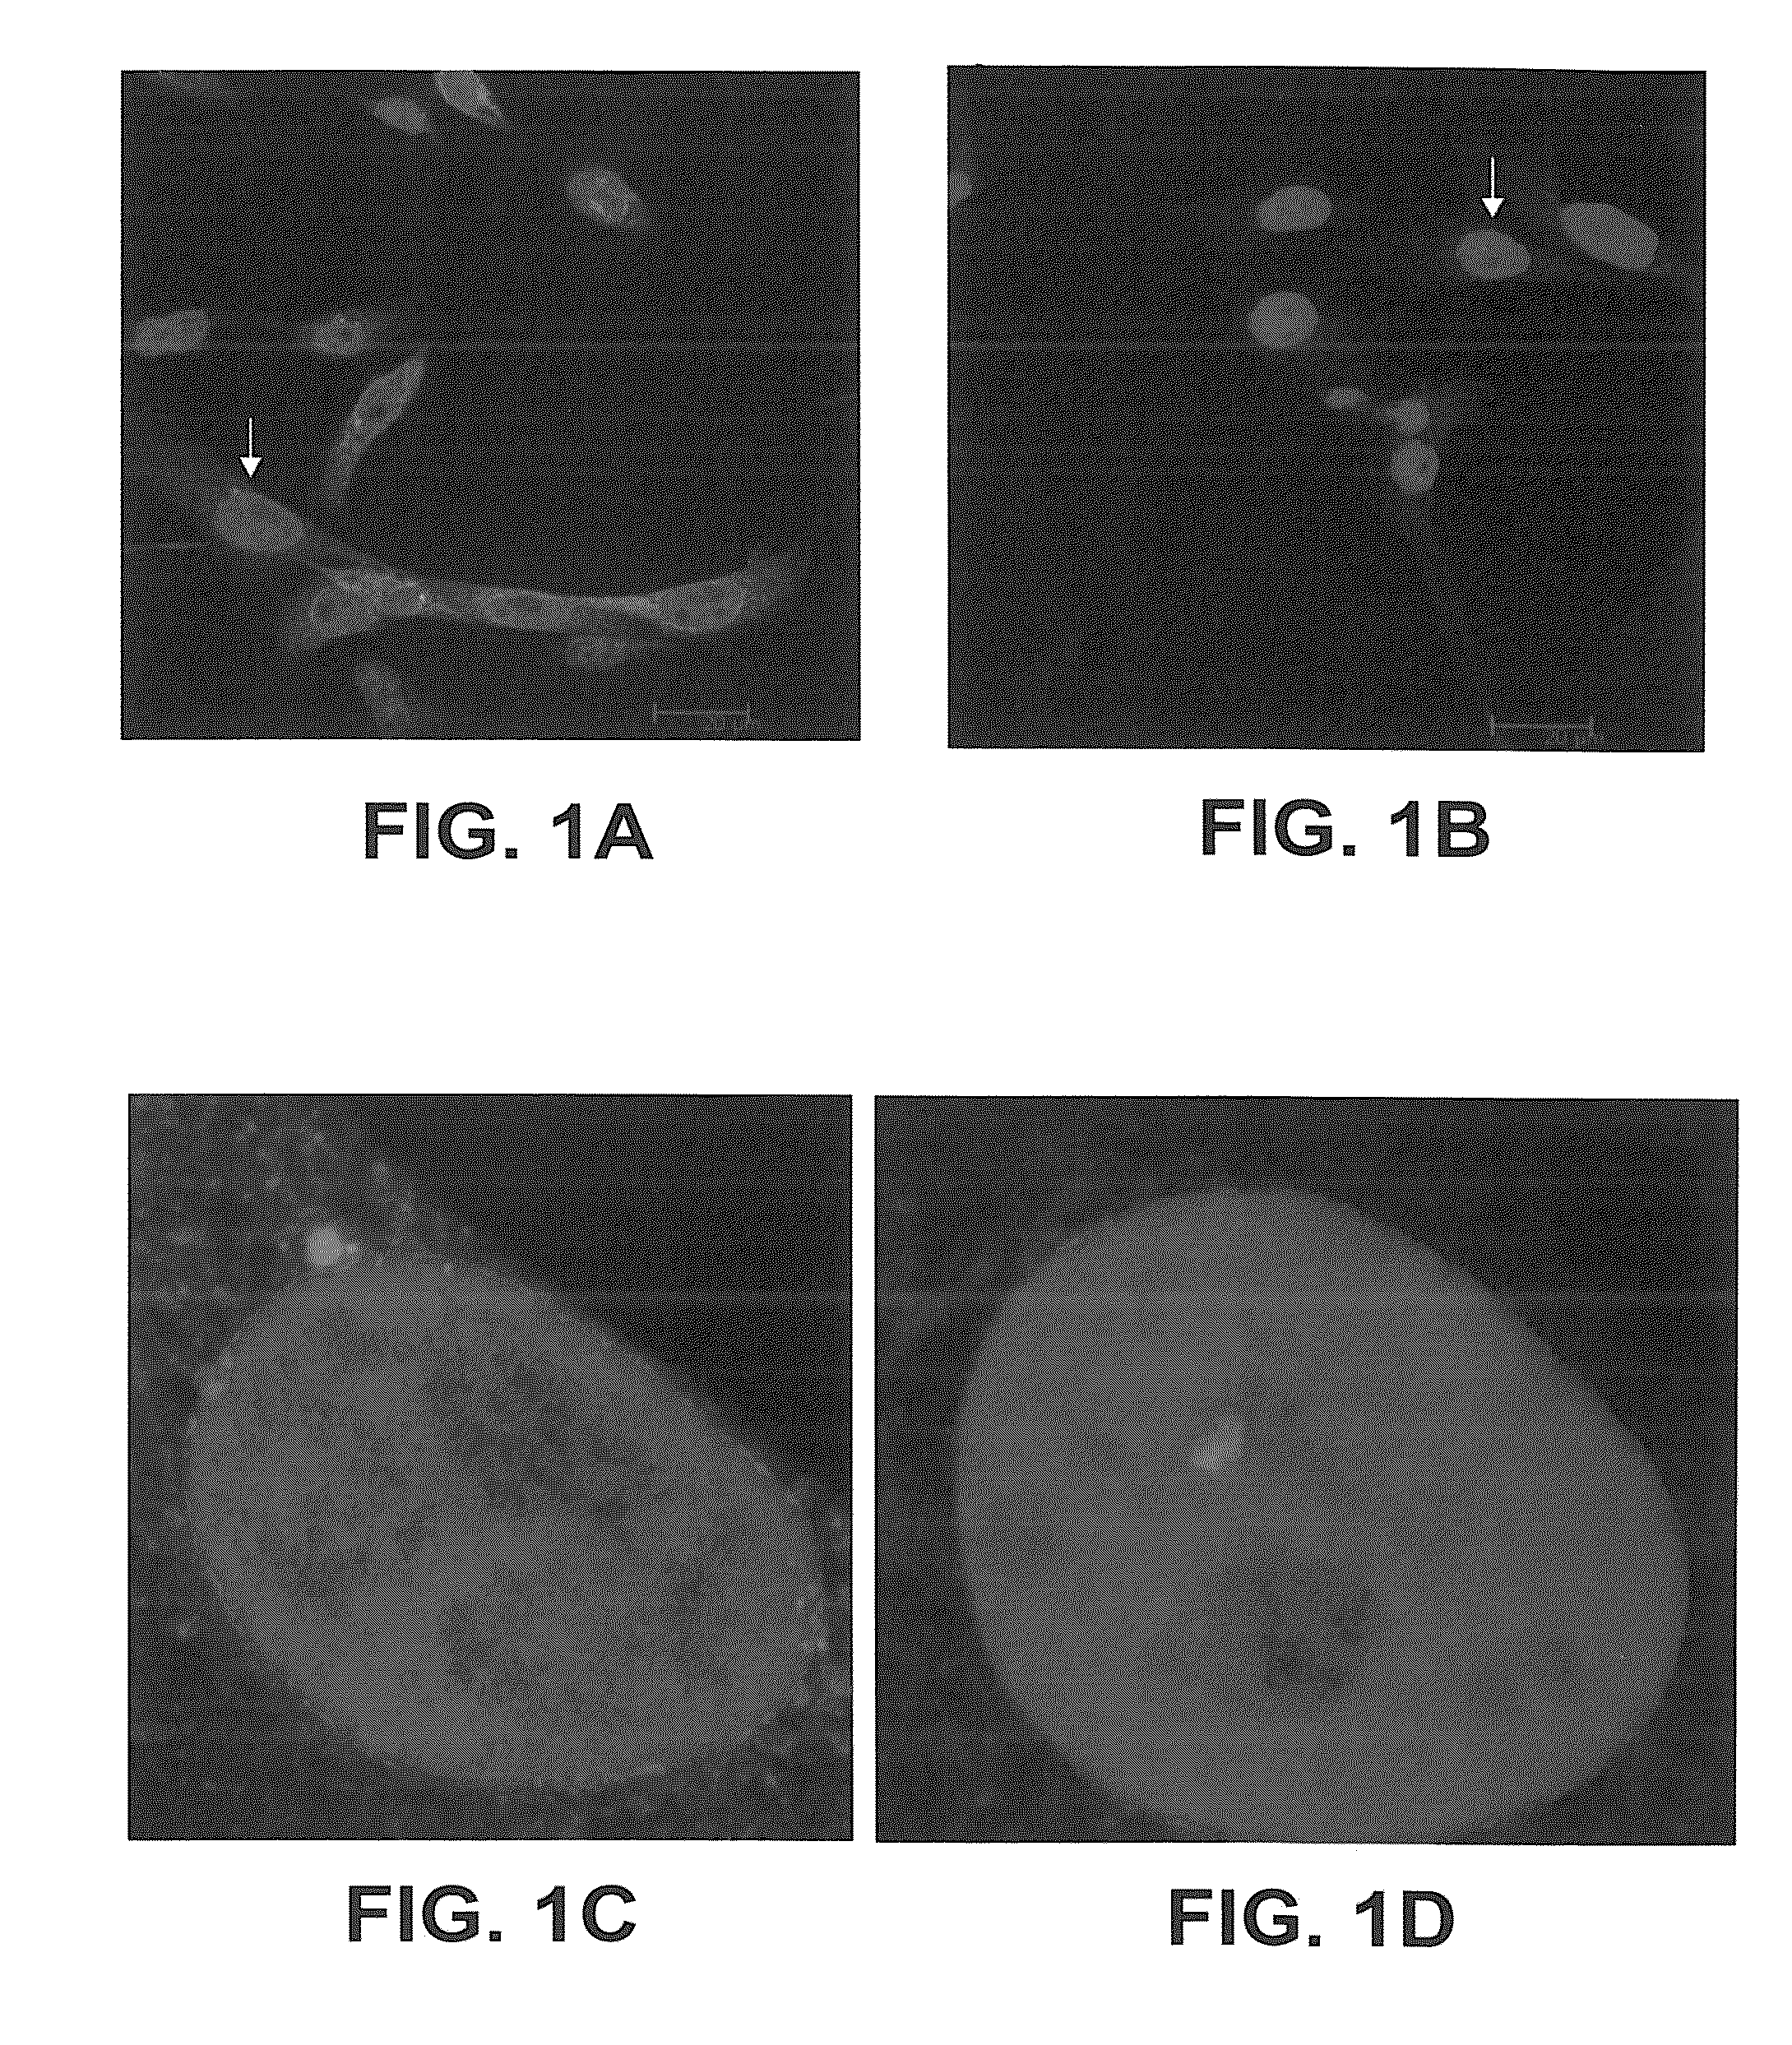 Methods and apparatus for diagnosis and/or prognosis of cancer